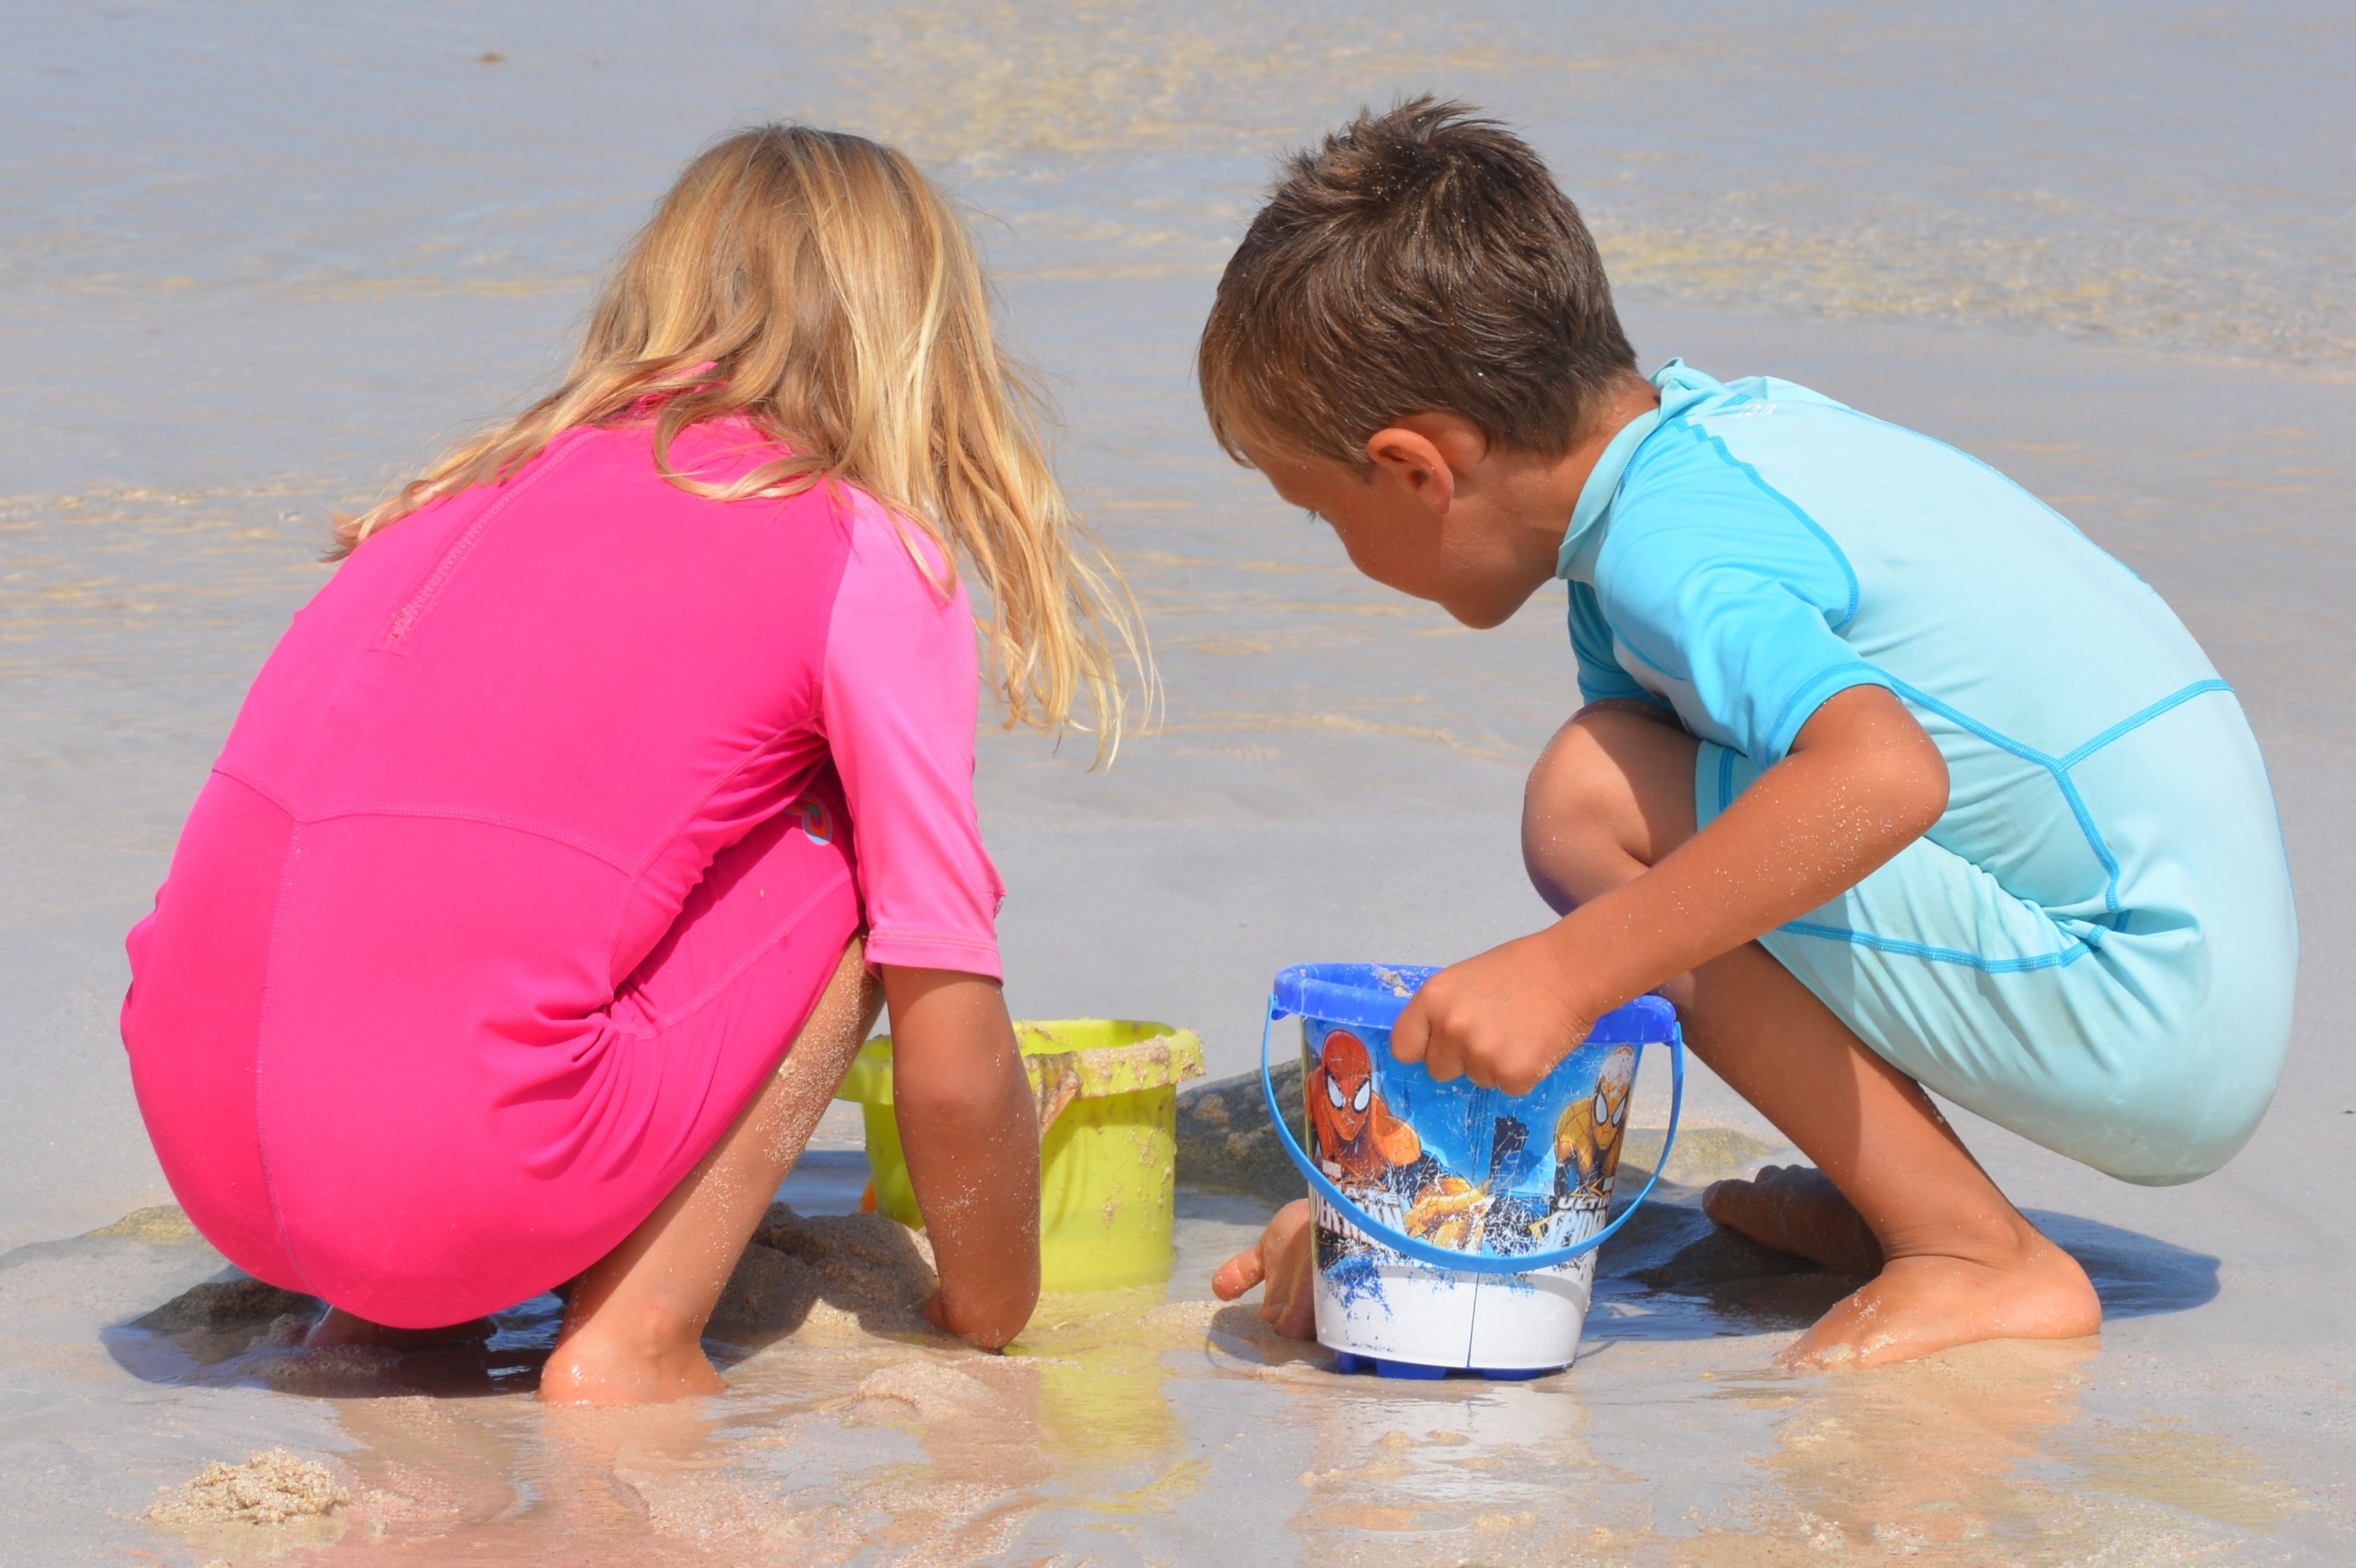 two child playing sand holding plastic buckets during daytime